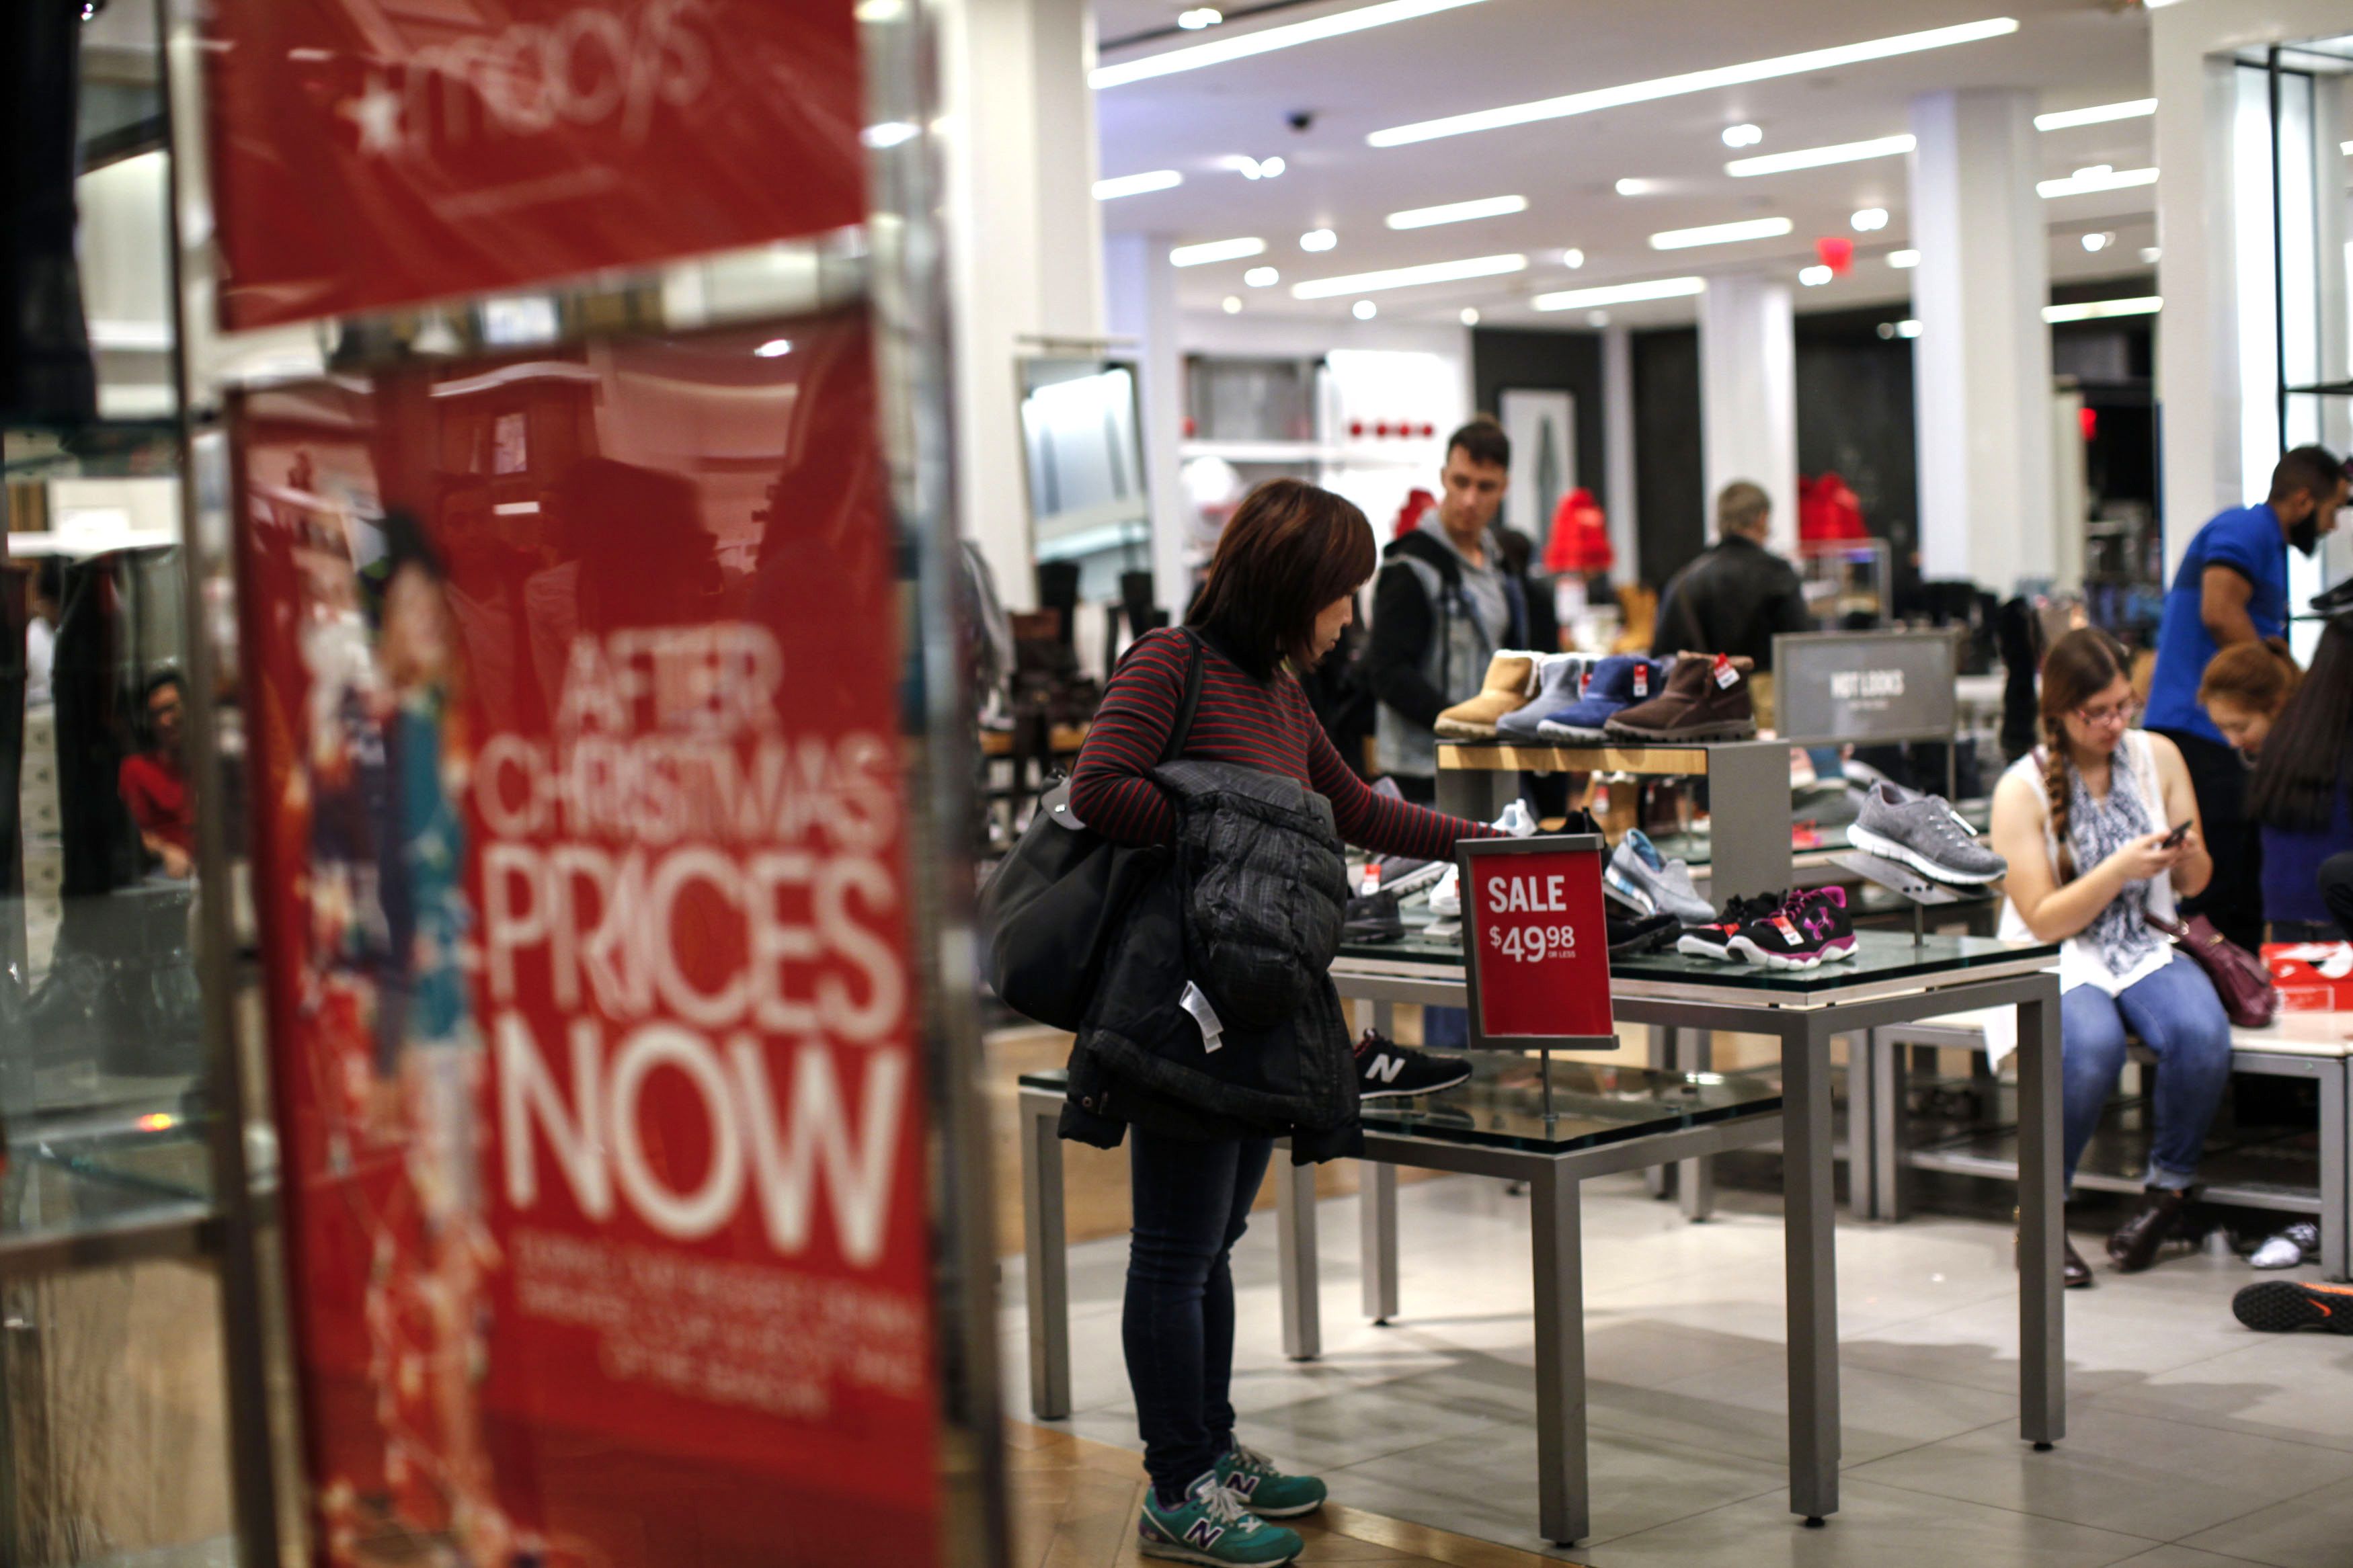 Macy's: Customers wearing red get special discount Feb. 2 through Feb. 6 